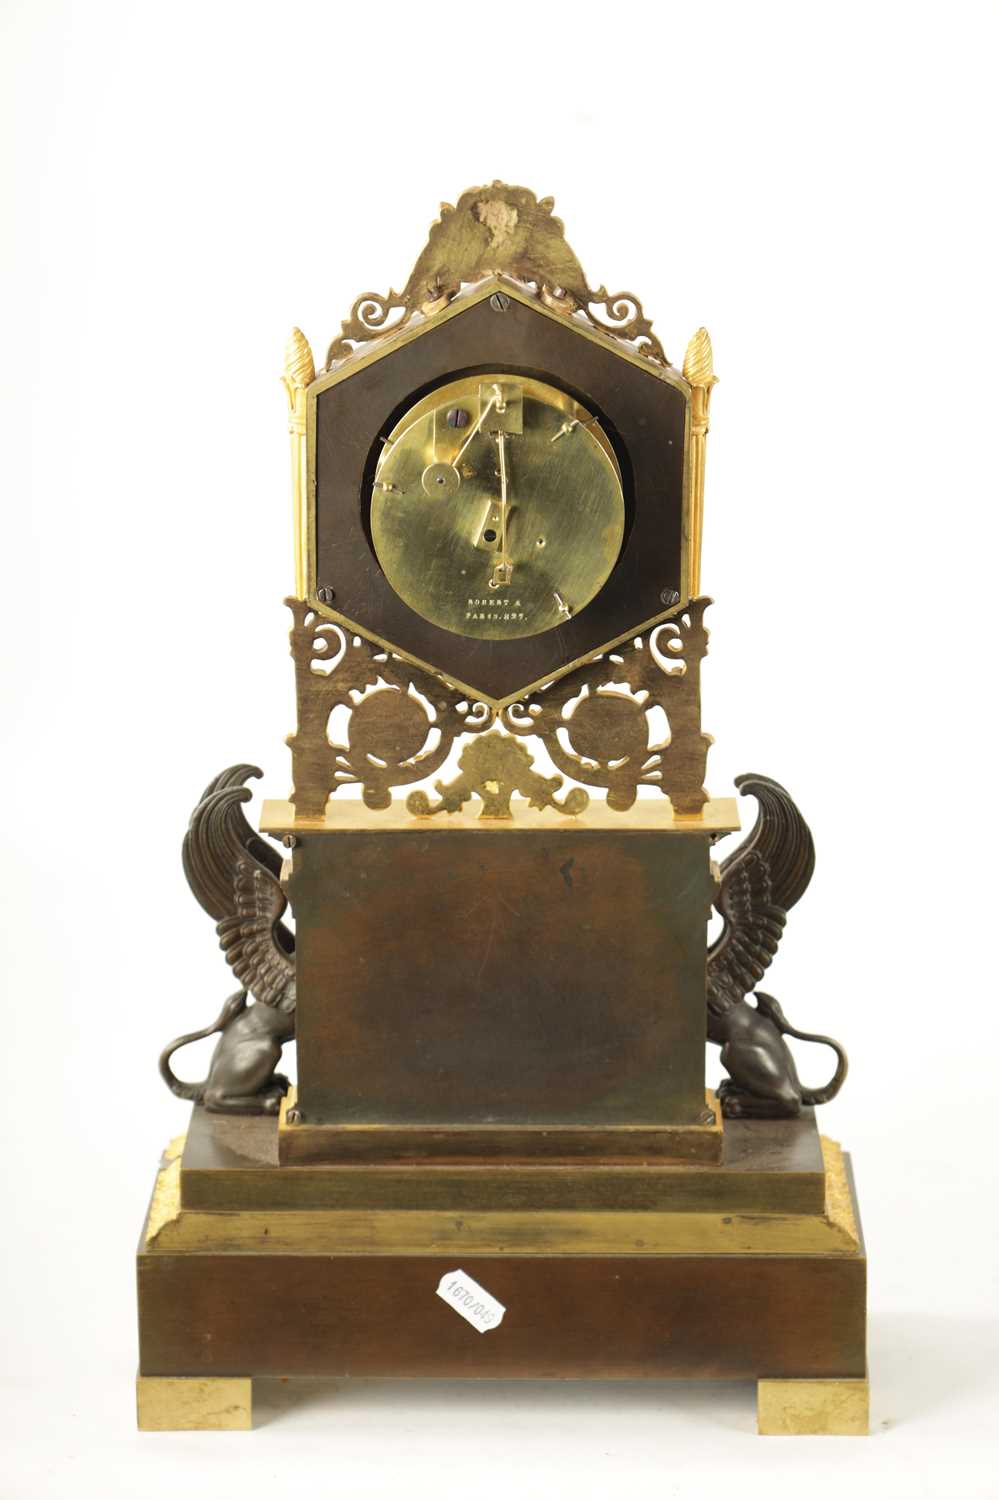 A GOOD LATE REGENCY FRENCH BRONZE AND ORMOLU AUTOMATION MANTEL CLOCK BY ROBERT PARIS NO.827 - Image 7 of 10